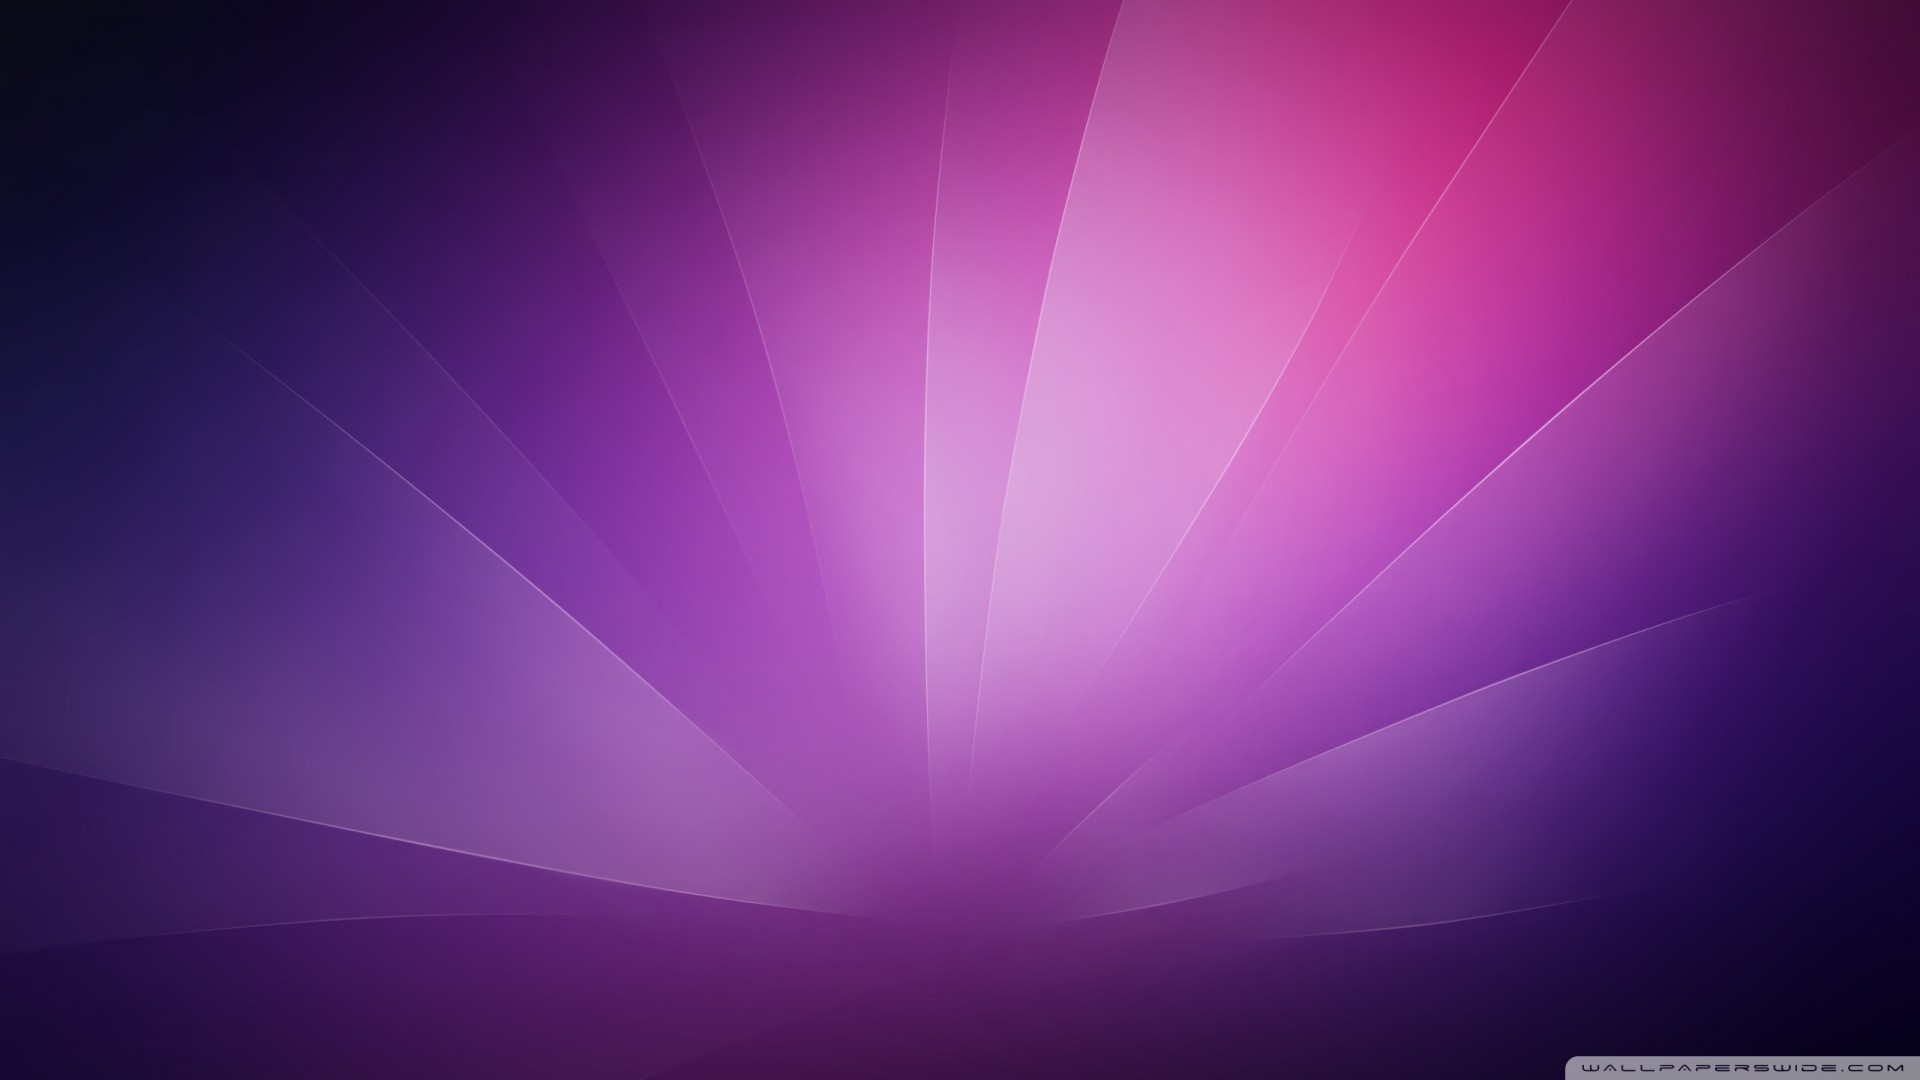 1920x1080 Purple Wallpapers HD - Android Apps on Google Play new colour hd wallpapers  | Wallscreenart.com ...